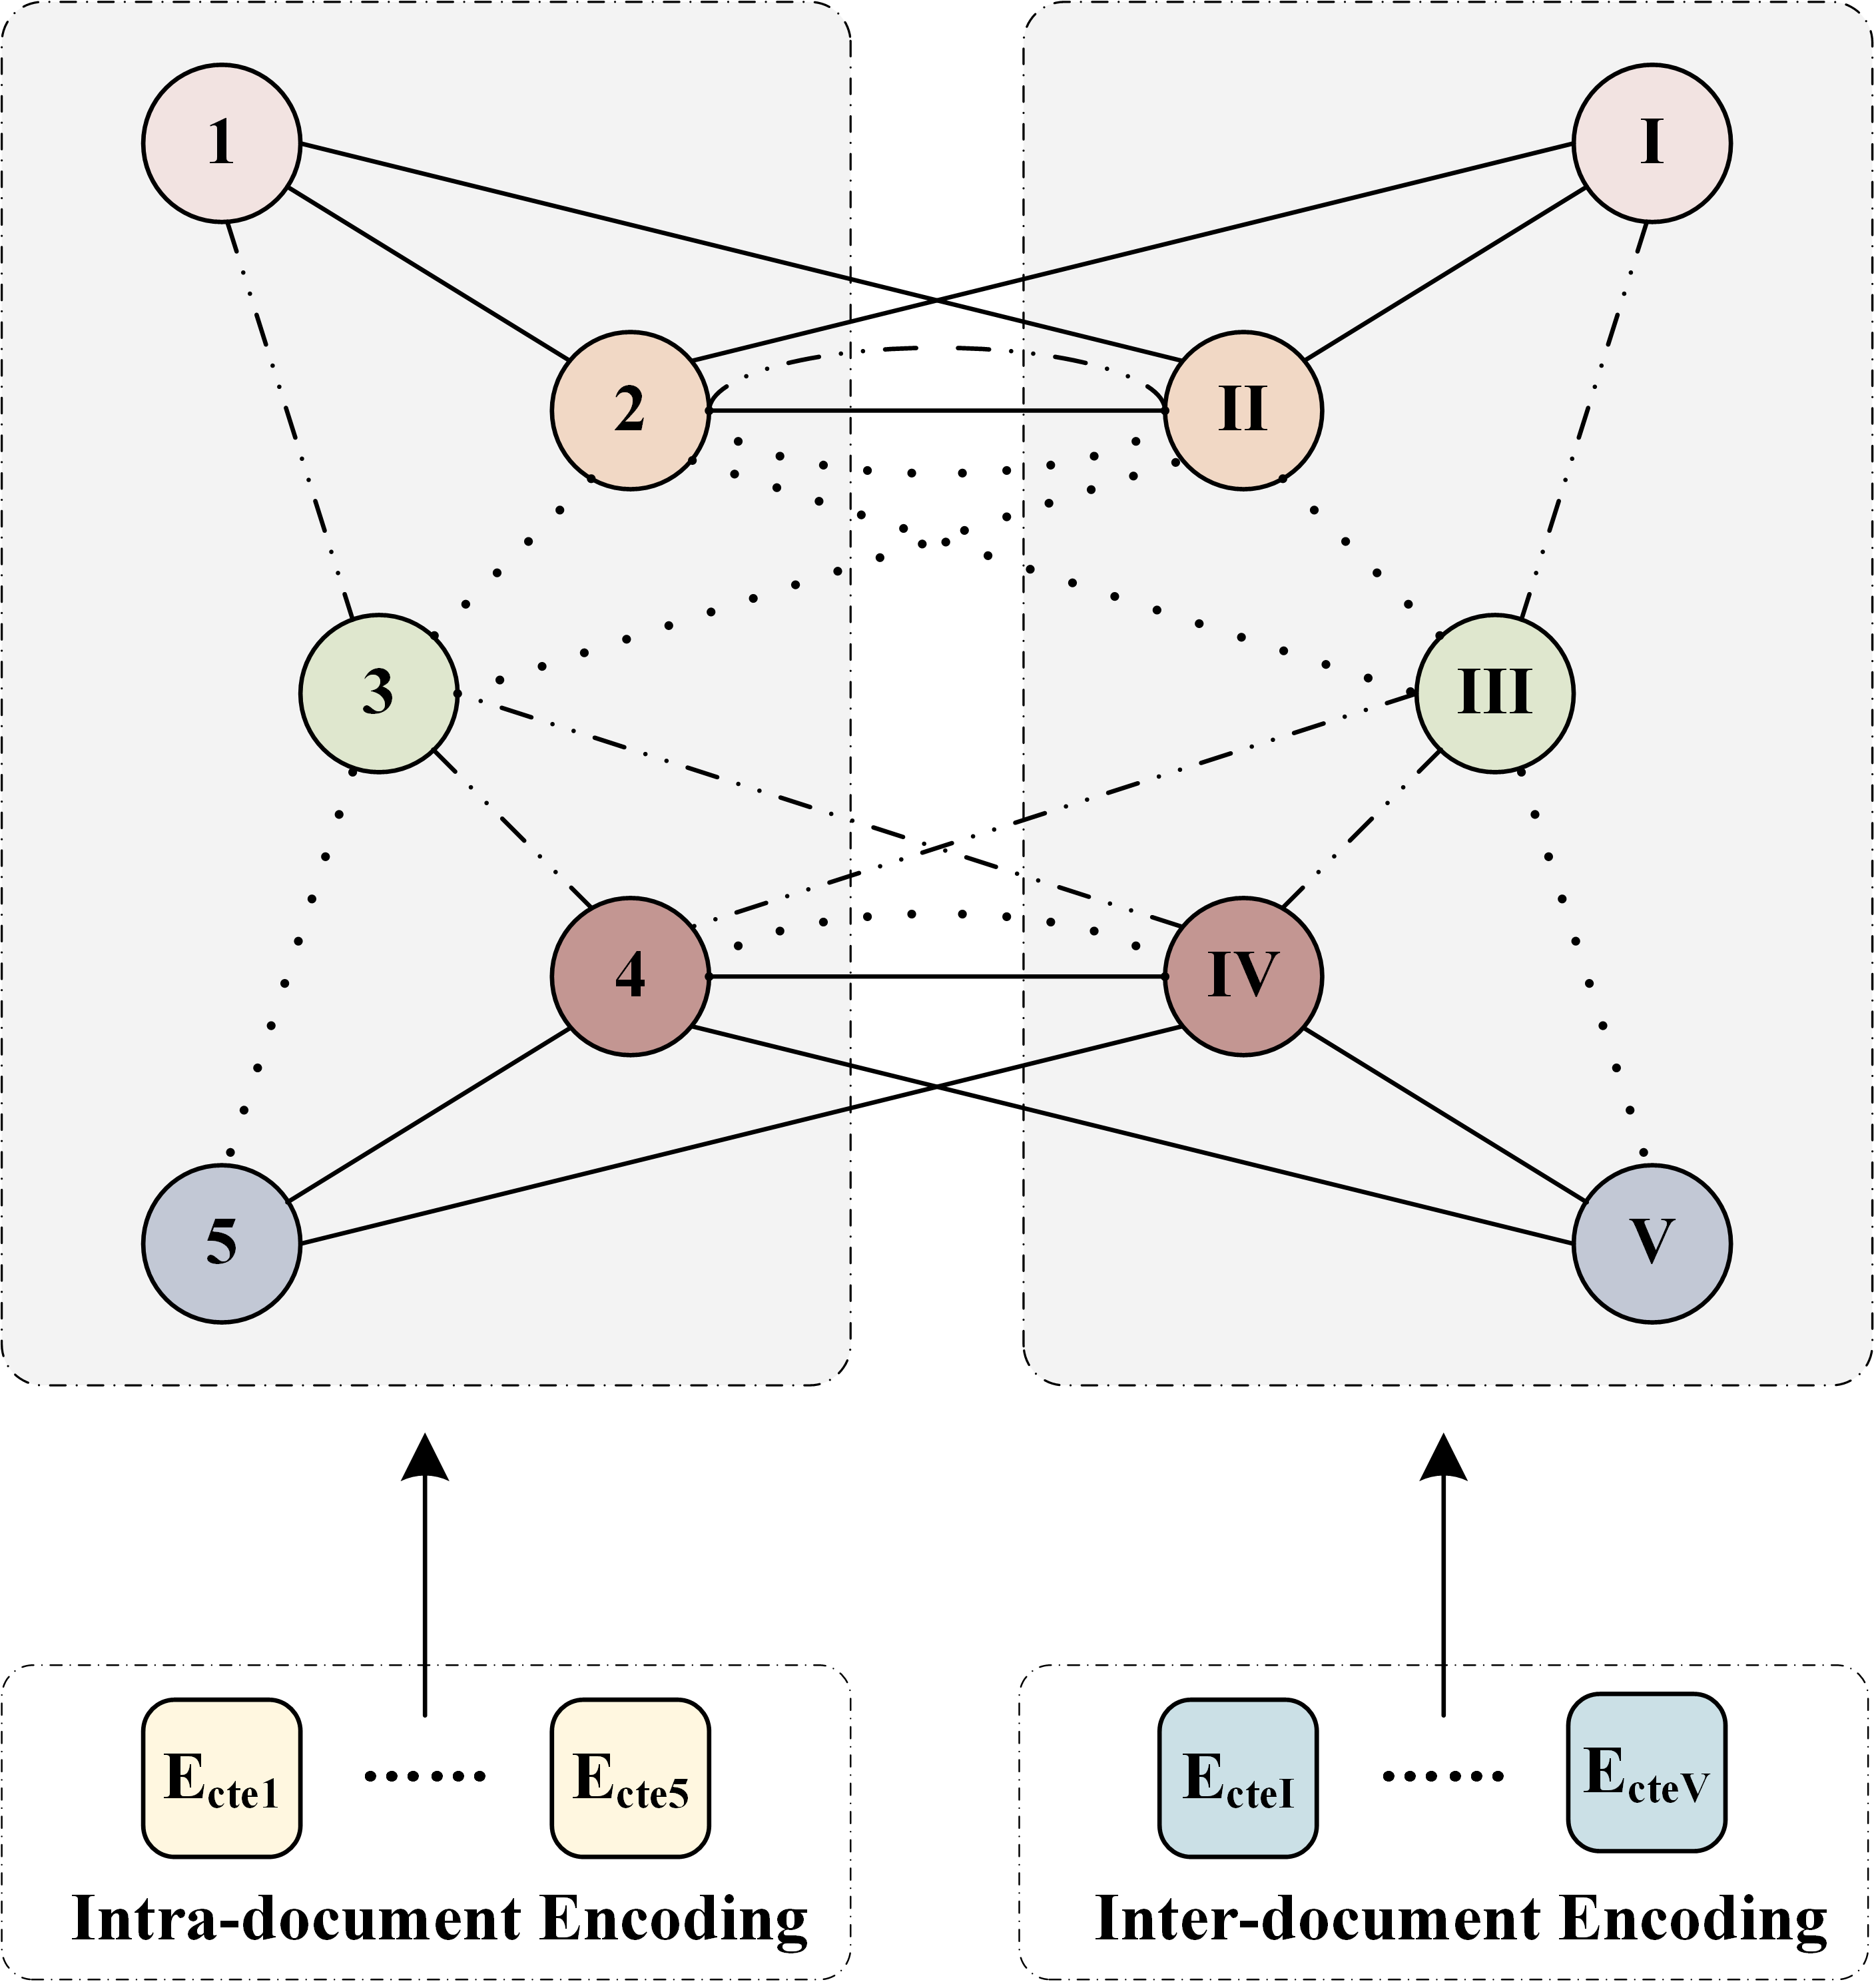 Dual Evidence Fusion Graph Network. Node 1 and node I denote different representations of the same evidence sentence from different encoding methods, similarly for node 2 and node II, etc. We define three kinds of edges in total.